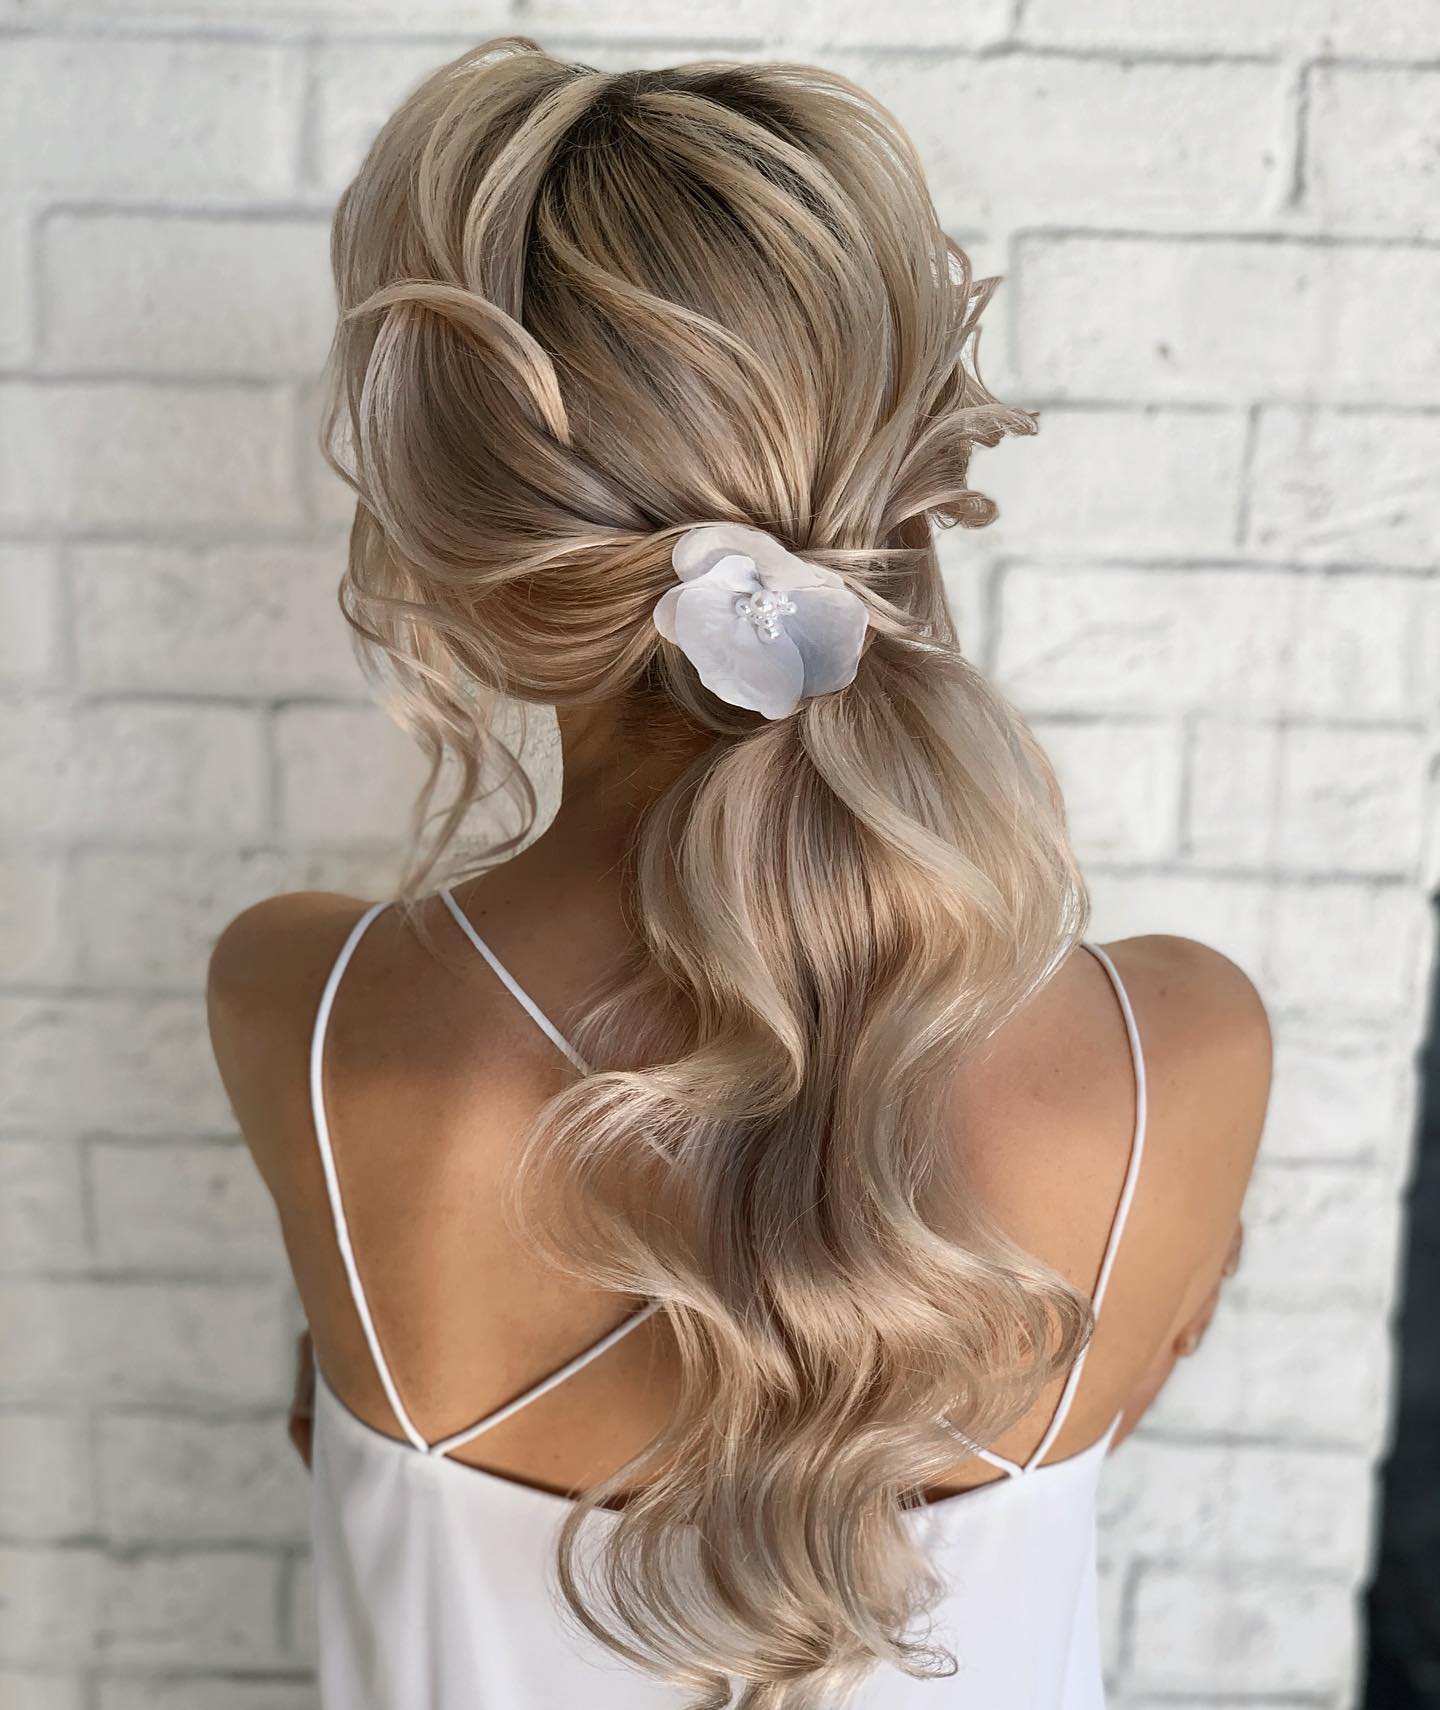 curled low pony with a single flower